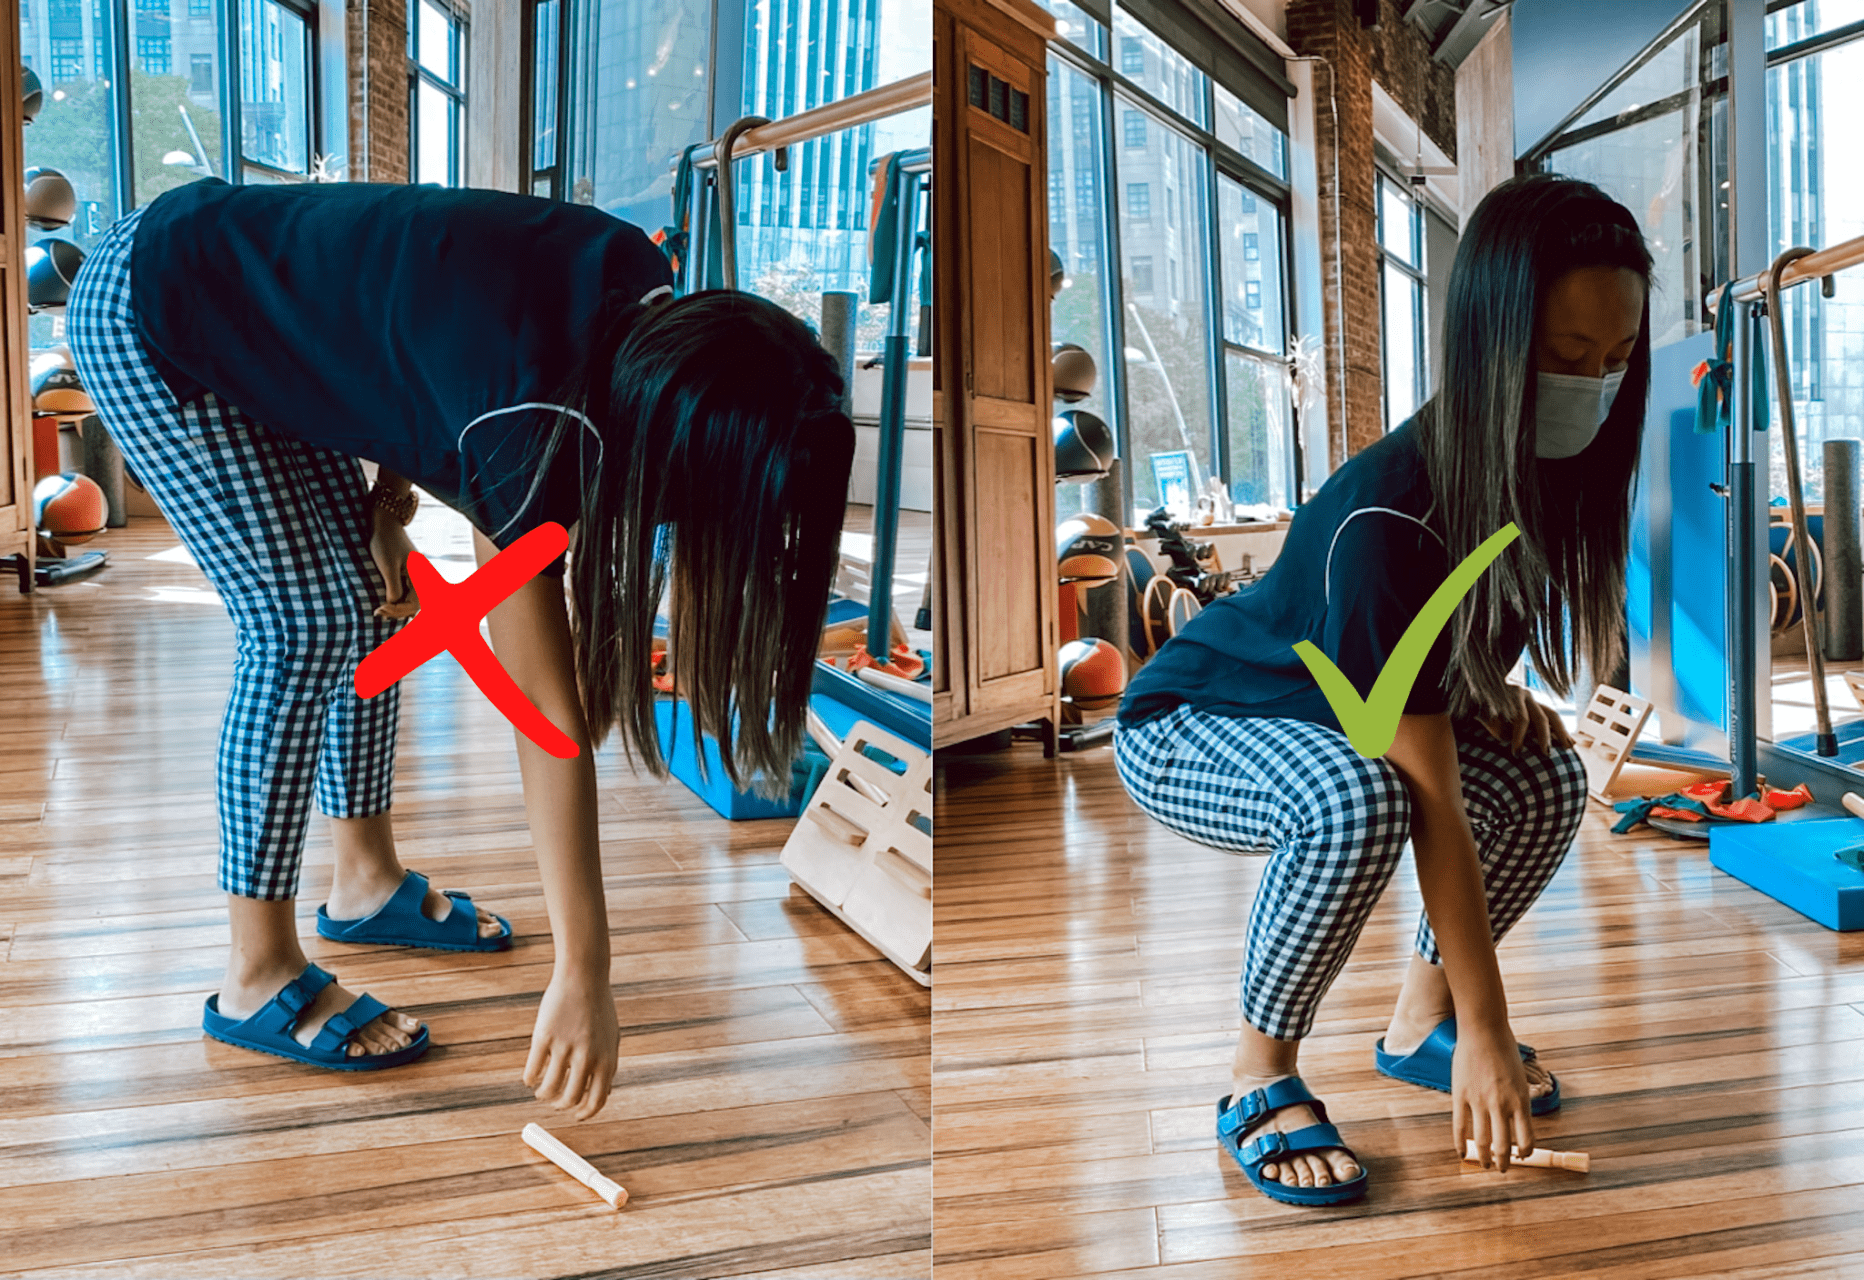 Dr. Eva Shi, Physical Therapist at Physio Logic NYC in Brooklyn, NY, demonstrates the correct way to bend to prevent lower back pain from bending over.